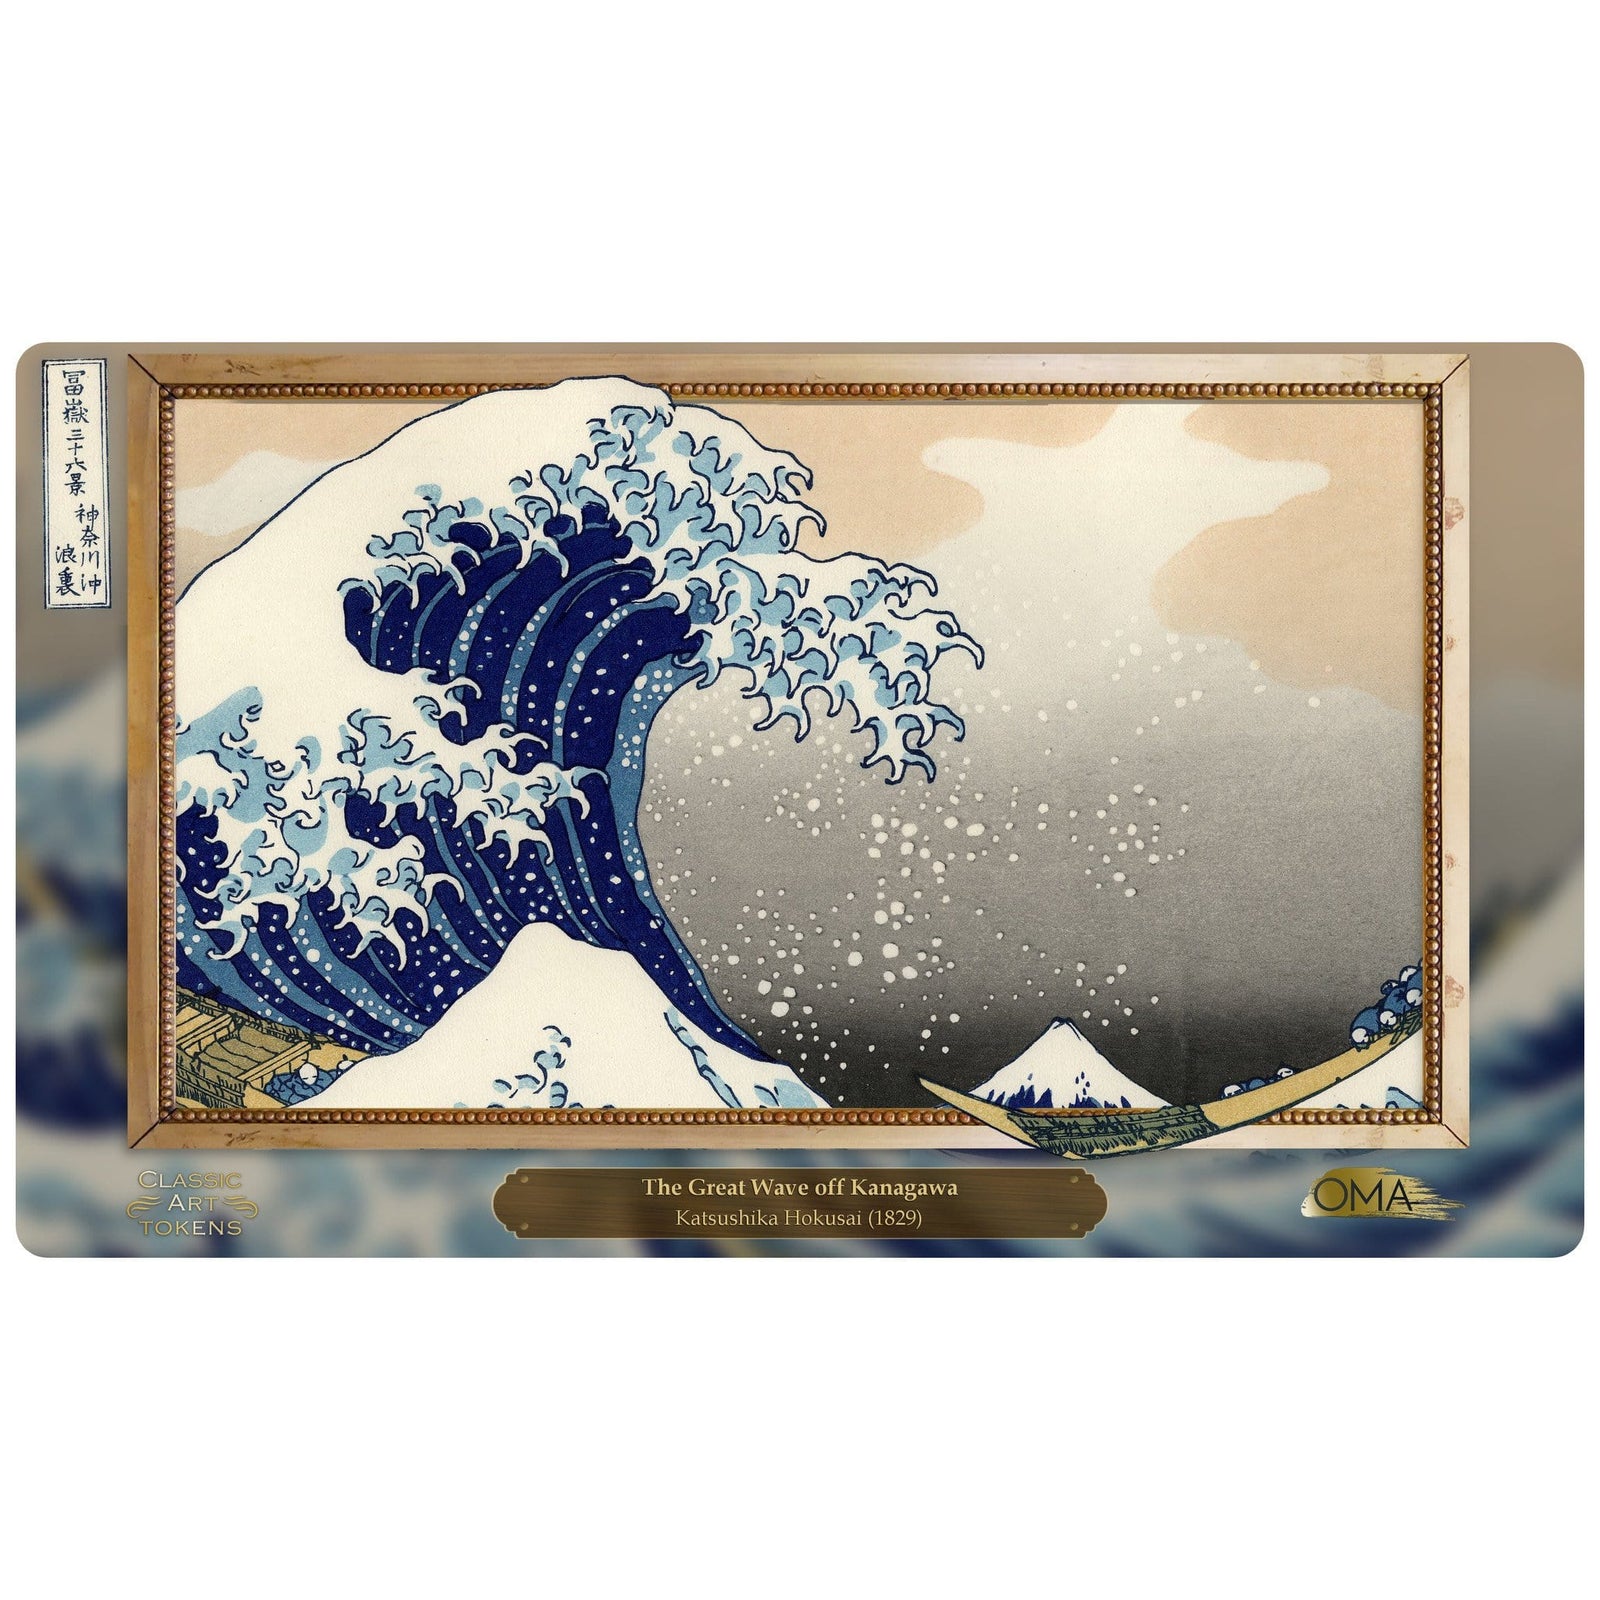 Elemental Playmat by Katsushika Hokusai - Playmat - Original Magic Art - Accessories for Magic the Gathering and other card games